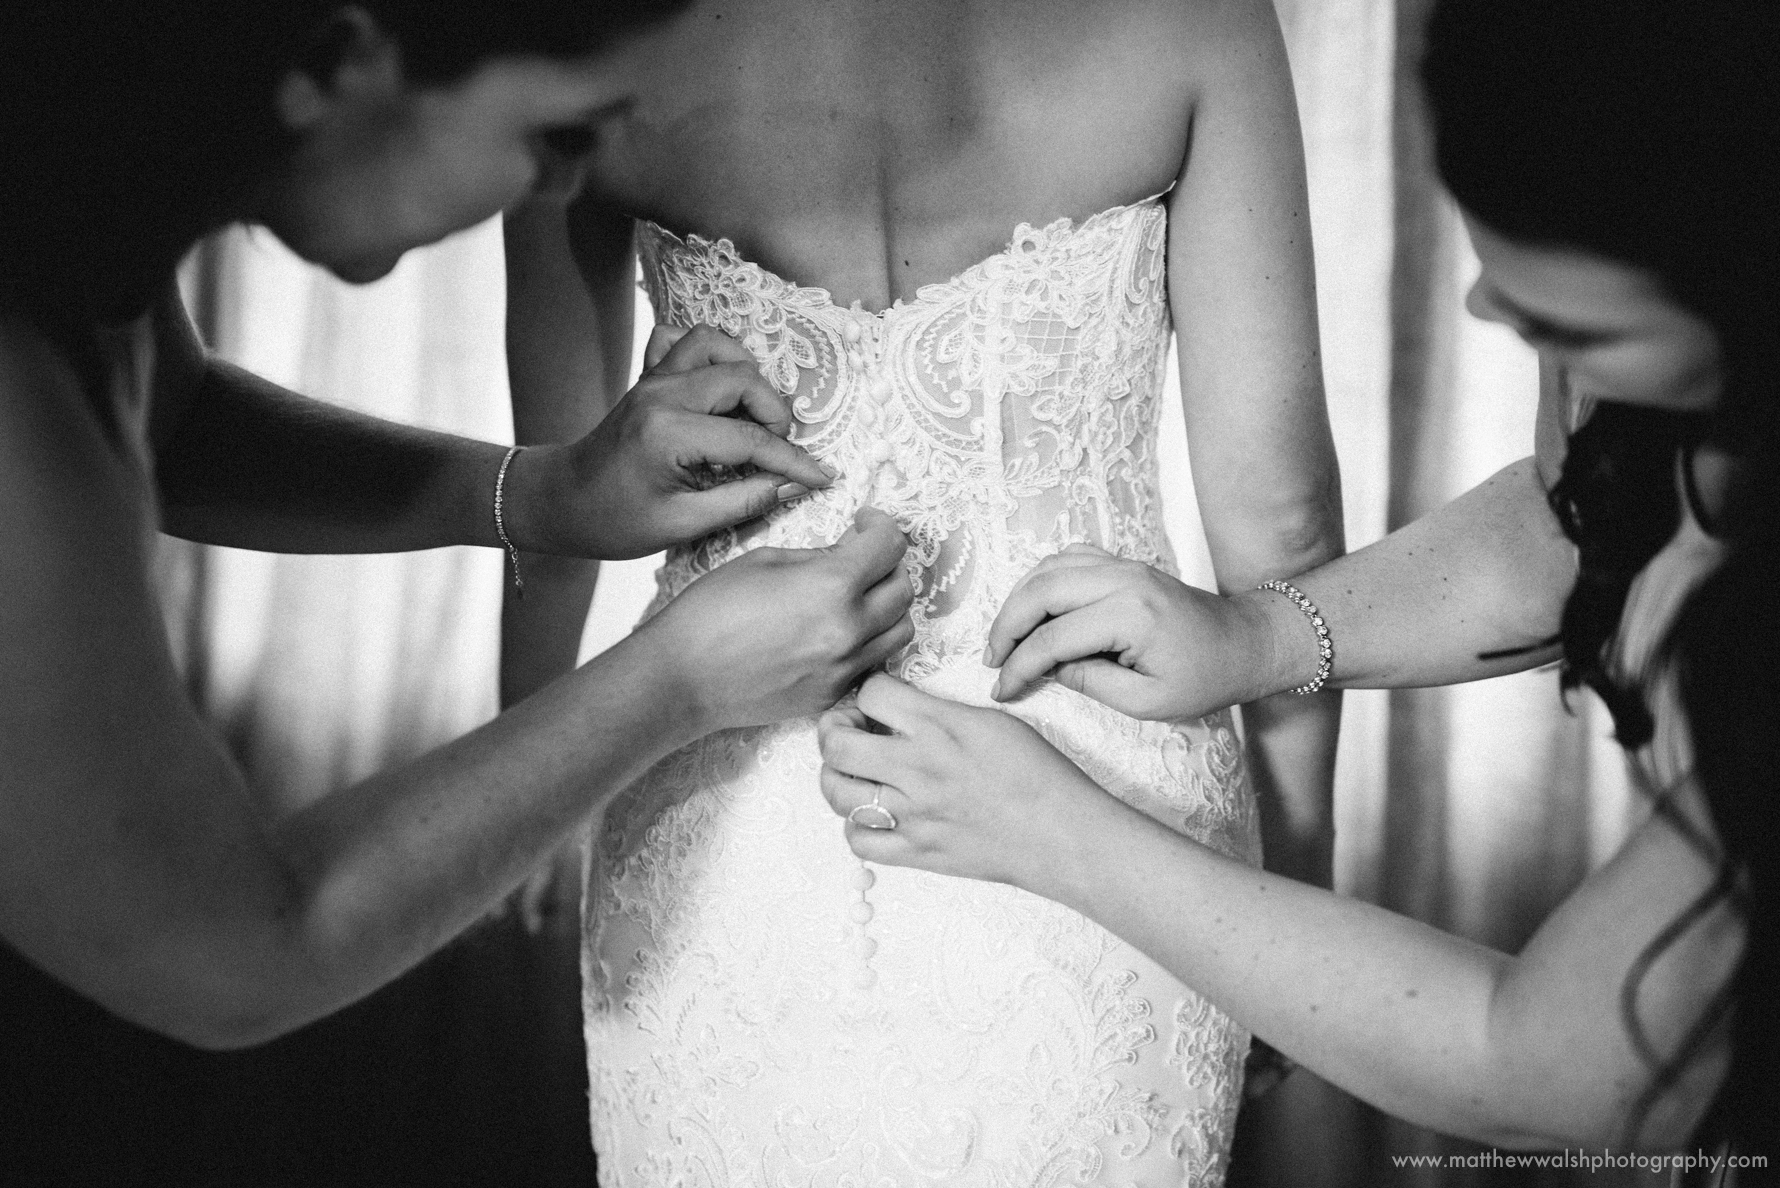 The bridesmaids help with the tradition of buttoning up the brides dress